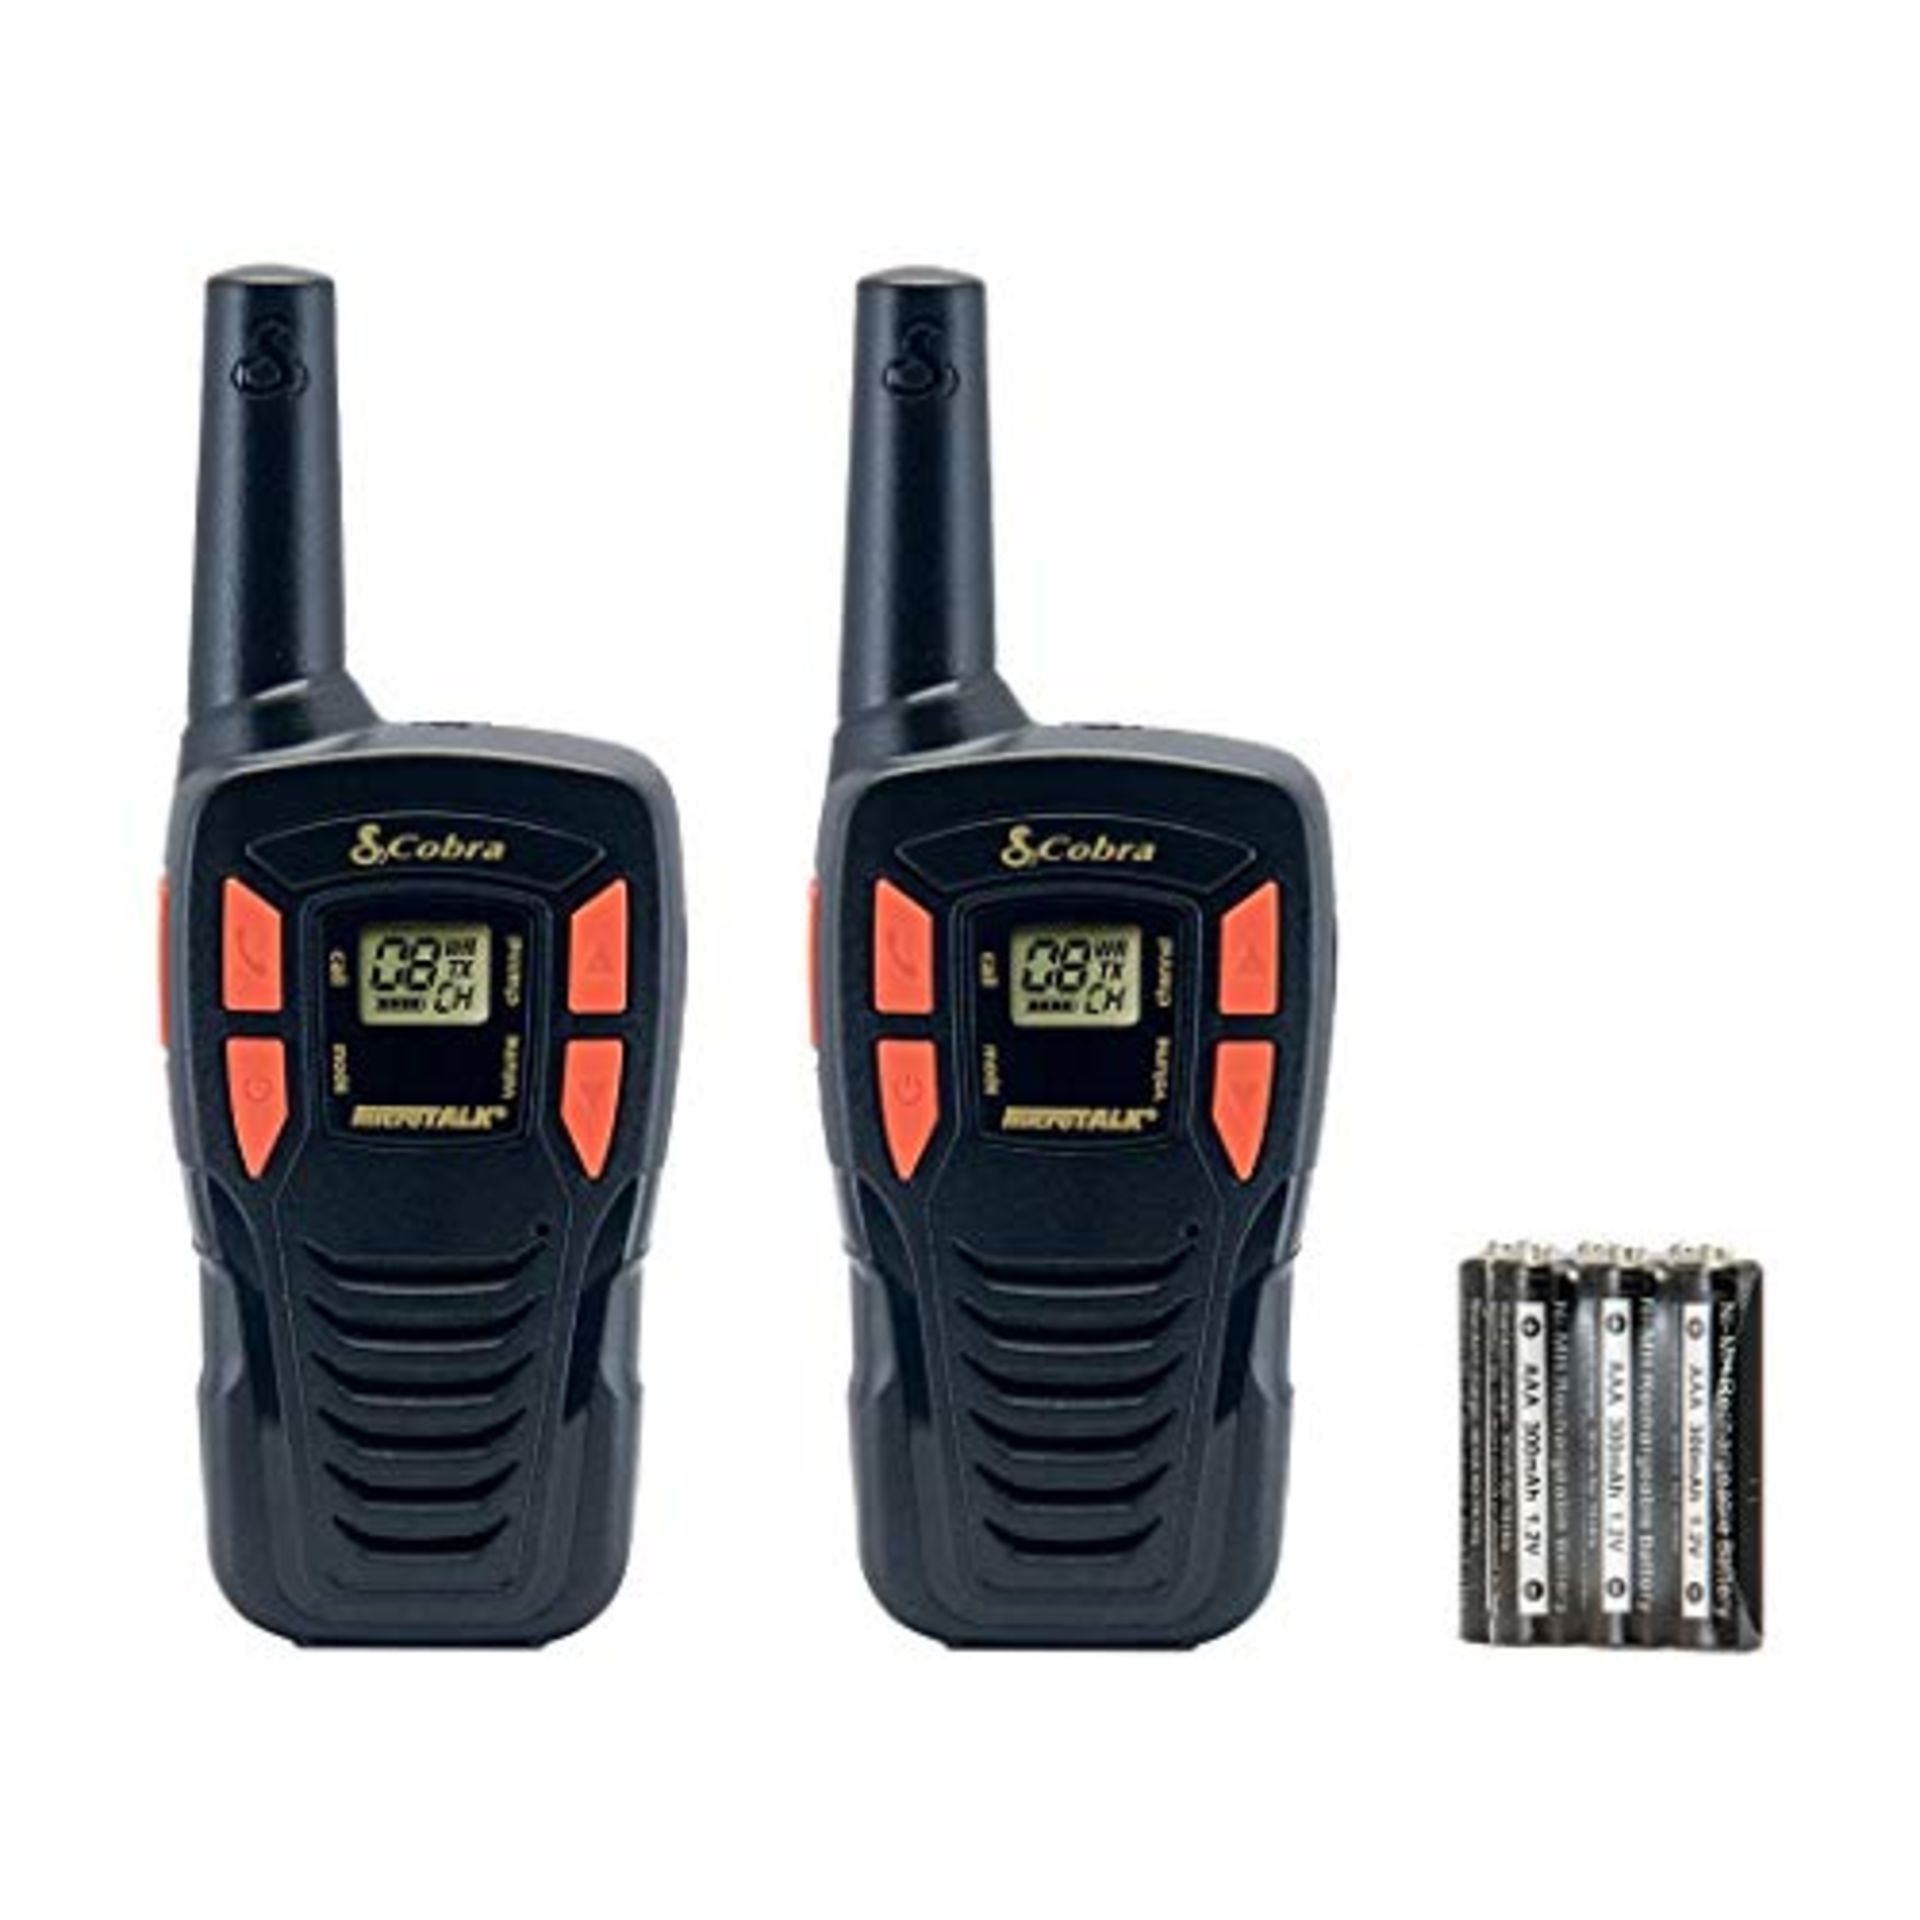 Cobra AM245 Lightweight Walkie Talkie with up to 5Km Range, Power Saving Function and